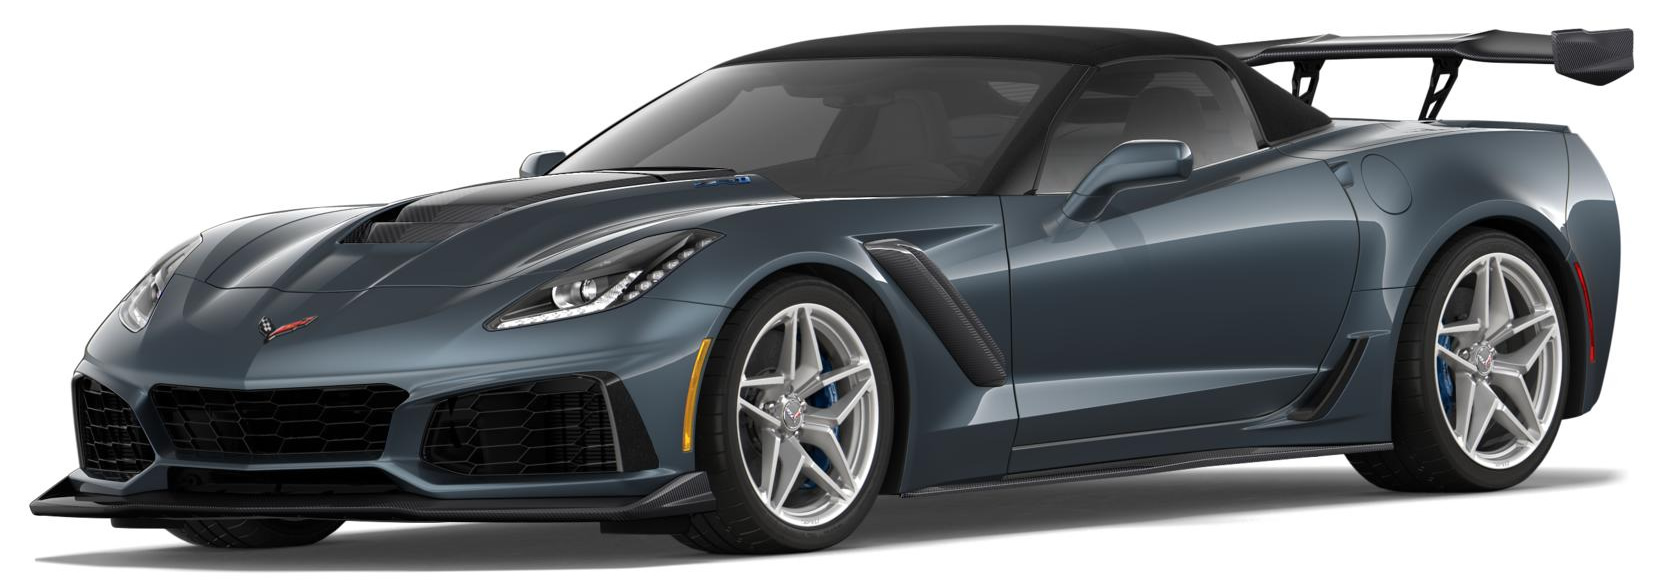 2019 Corvette ZR1 Convertible in Shadow Gray Metallic with the ZTK Track Performance Package